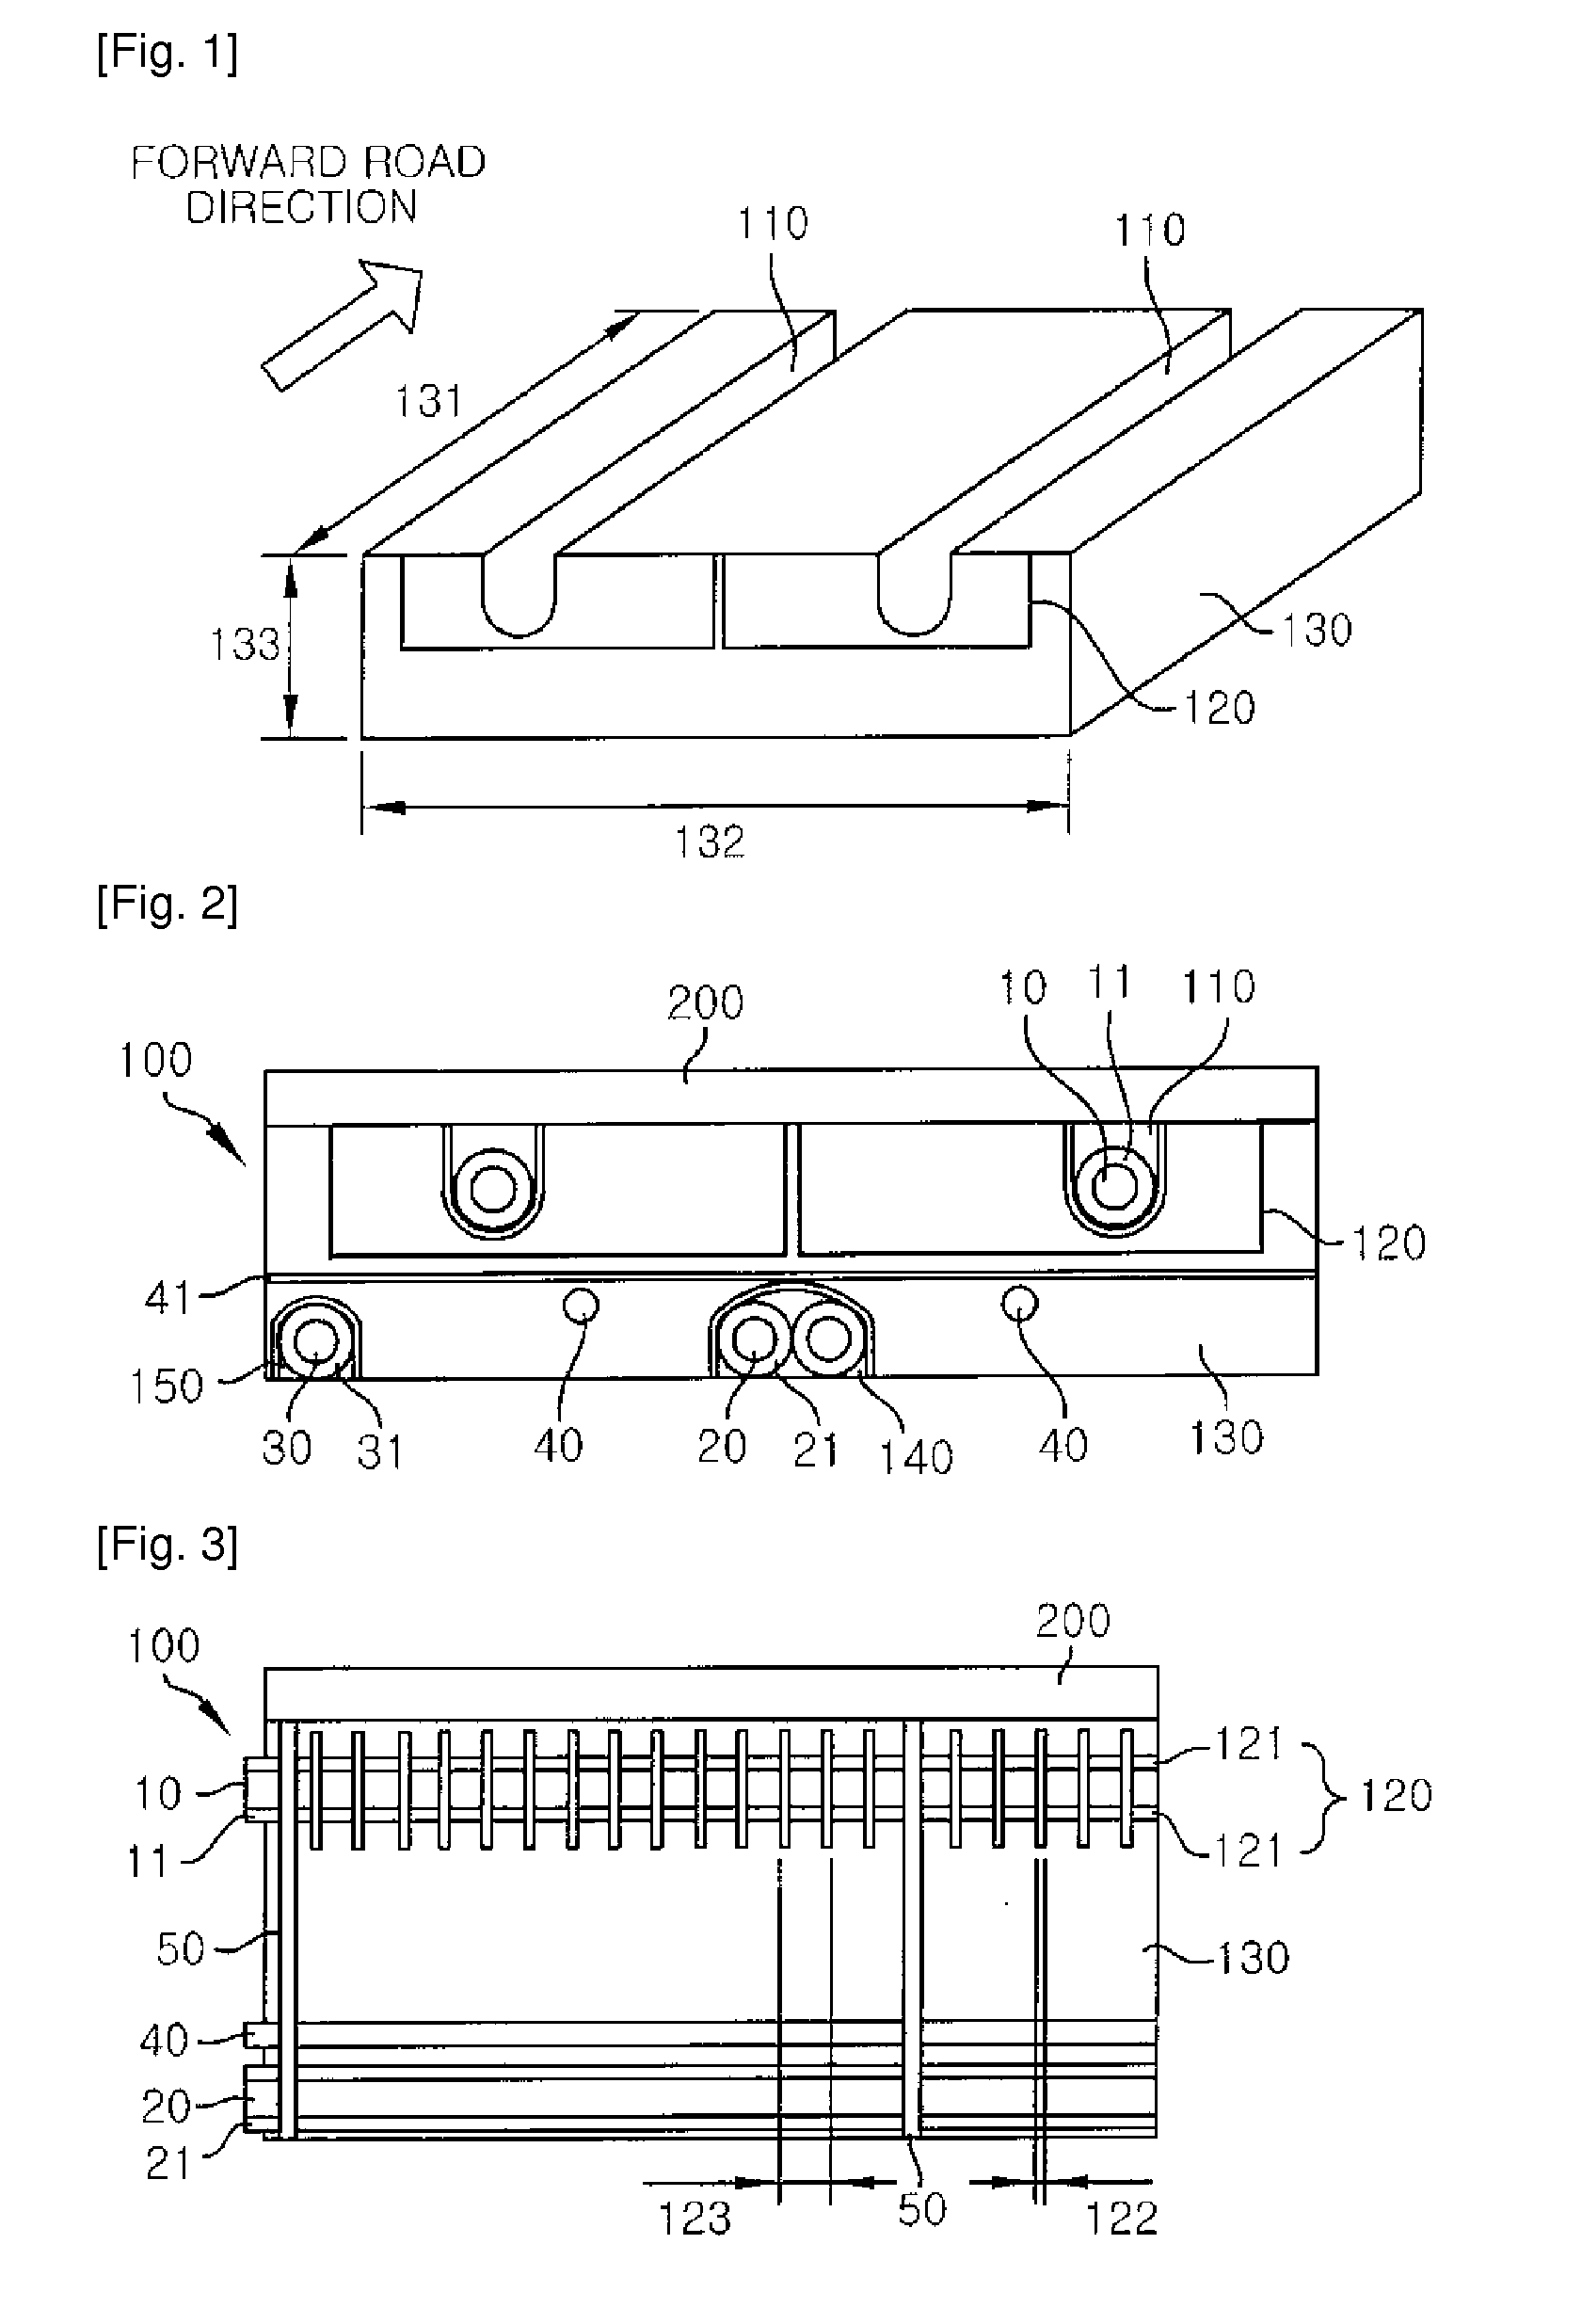 Power supply apparatus for on-line electric vehicle, method for forming same and magnetic field cancelation apparatus